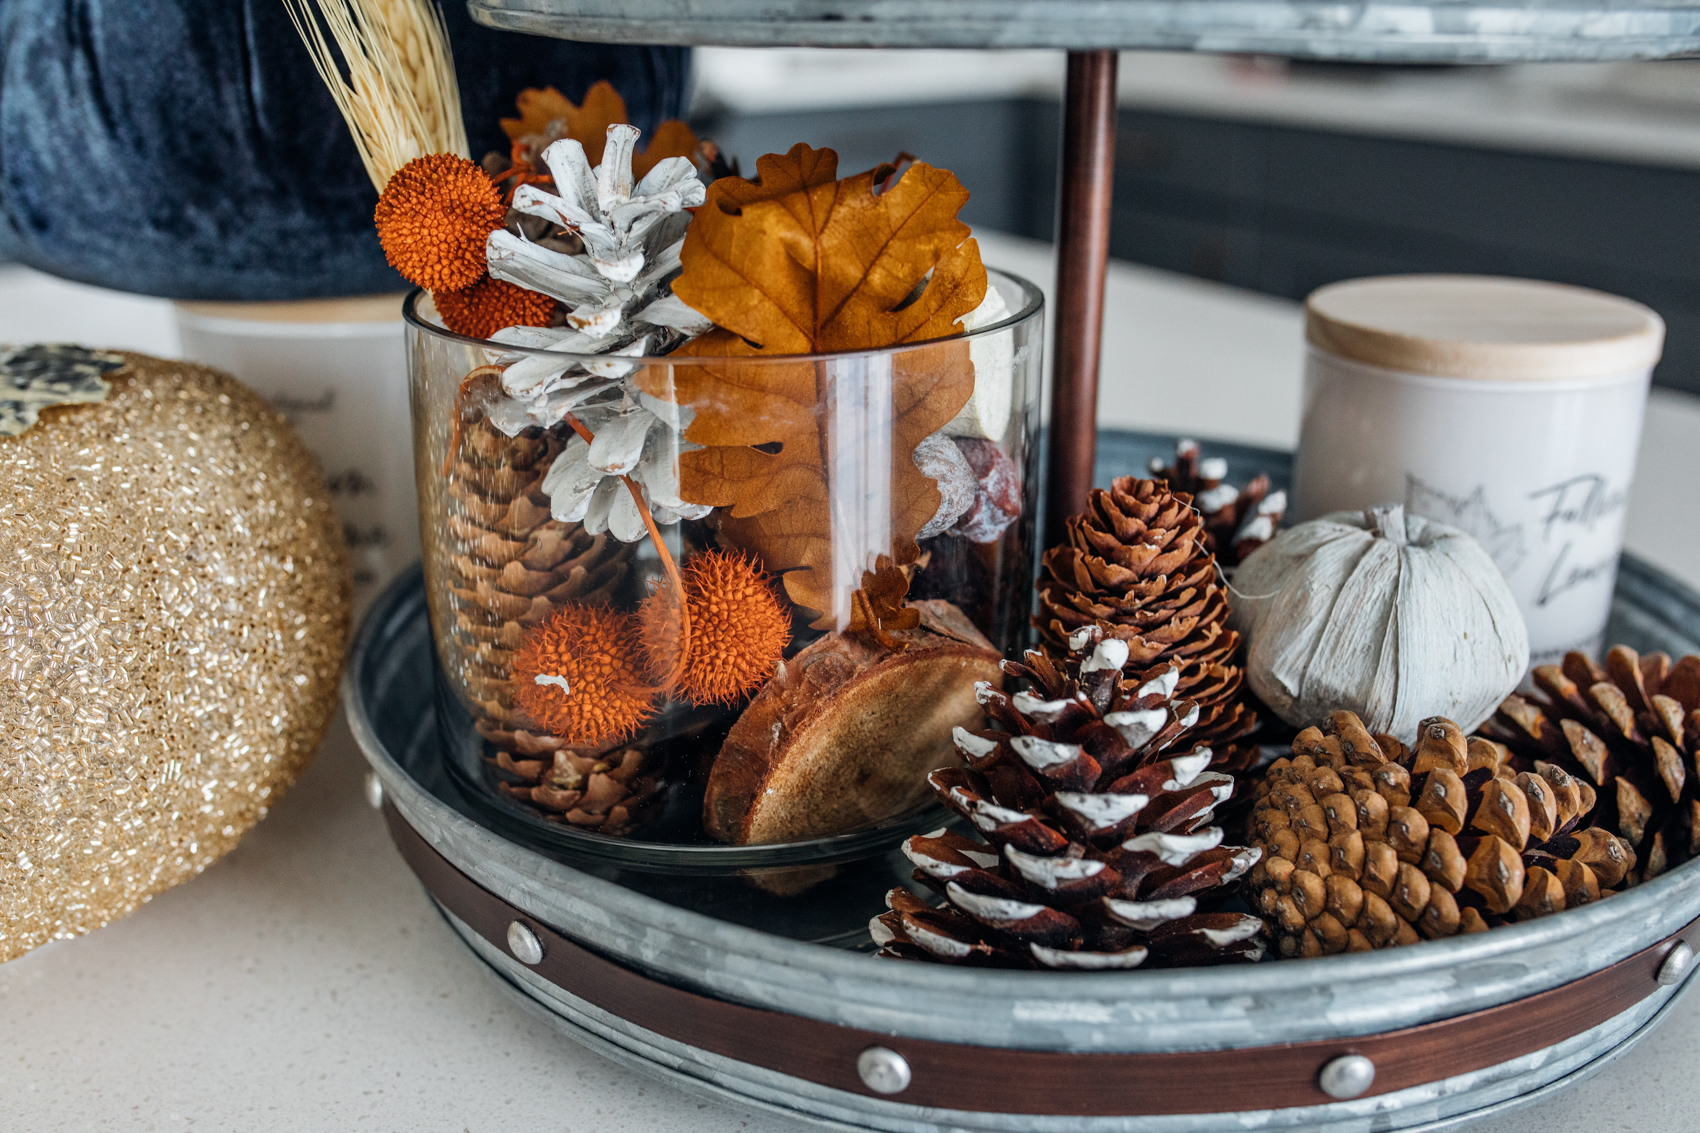 Fall kitchen decor with pinecones, fall leaves and candles from HomeGoods